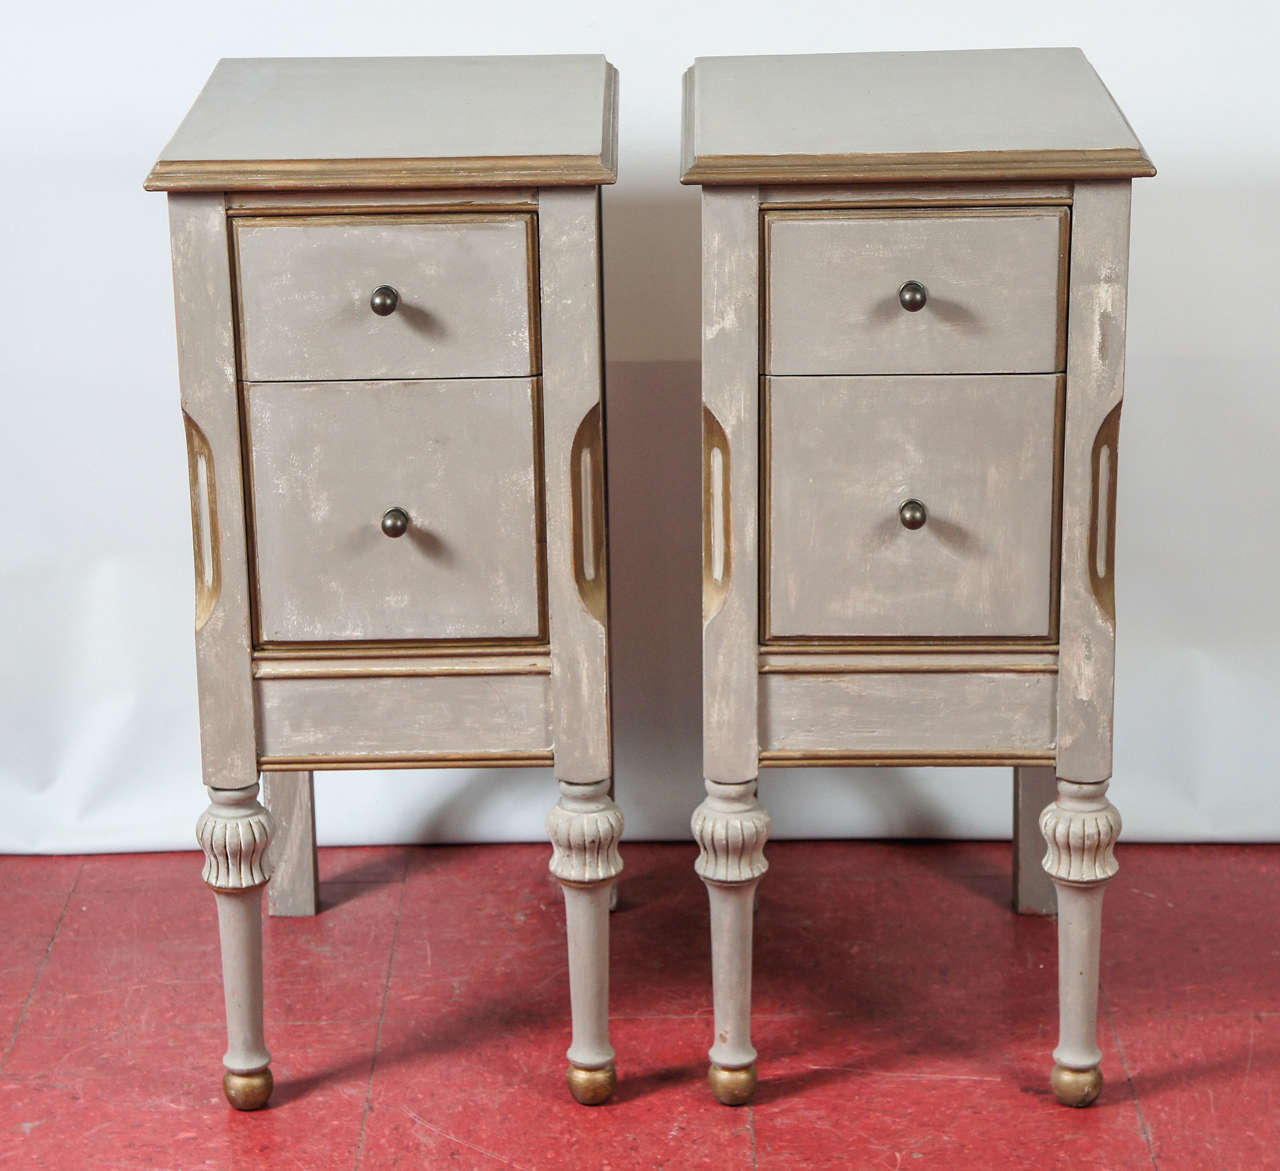 In the style of Swedish Gustavian or Louis XVI, these nightstands have generously deep dovetailed drawers with bronze pulls, and are painted French gray and trimmed in gilt.